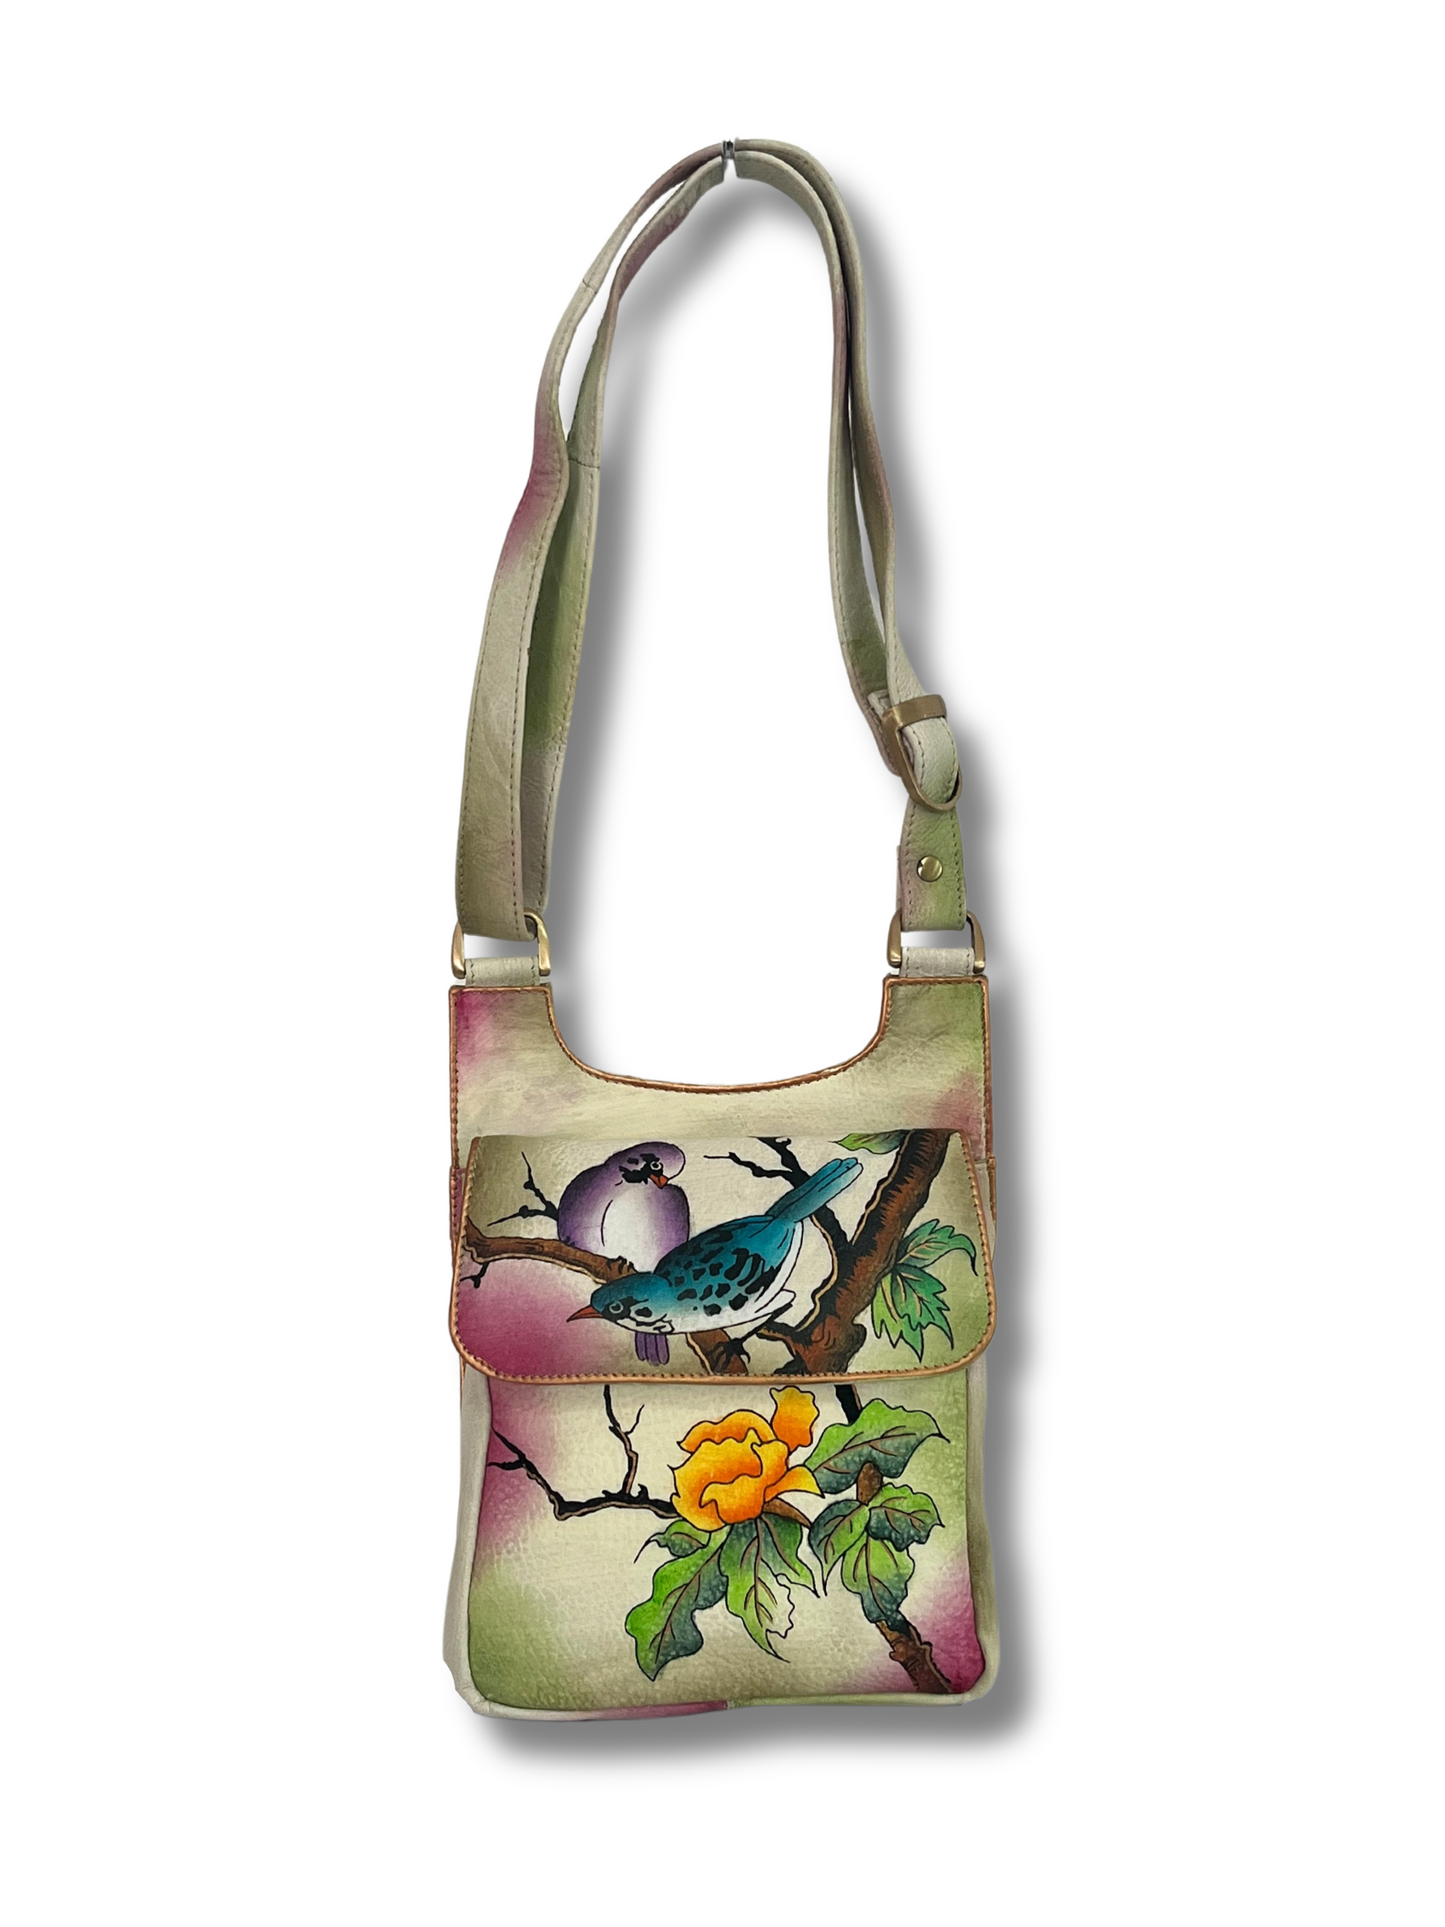 Amour hand-painted leather bag